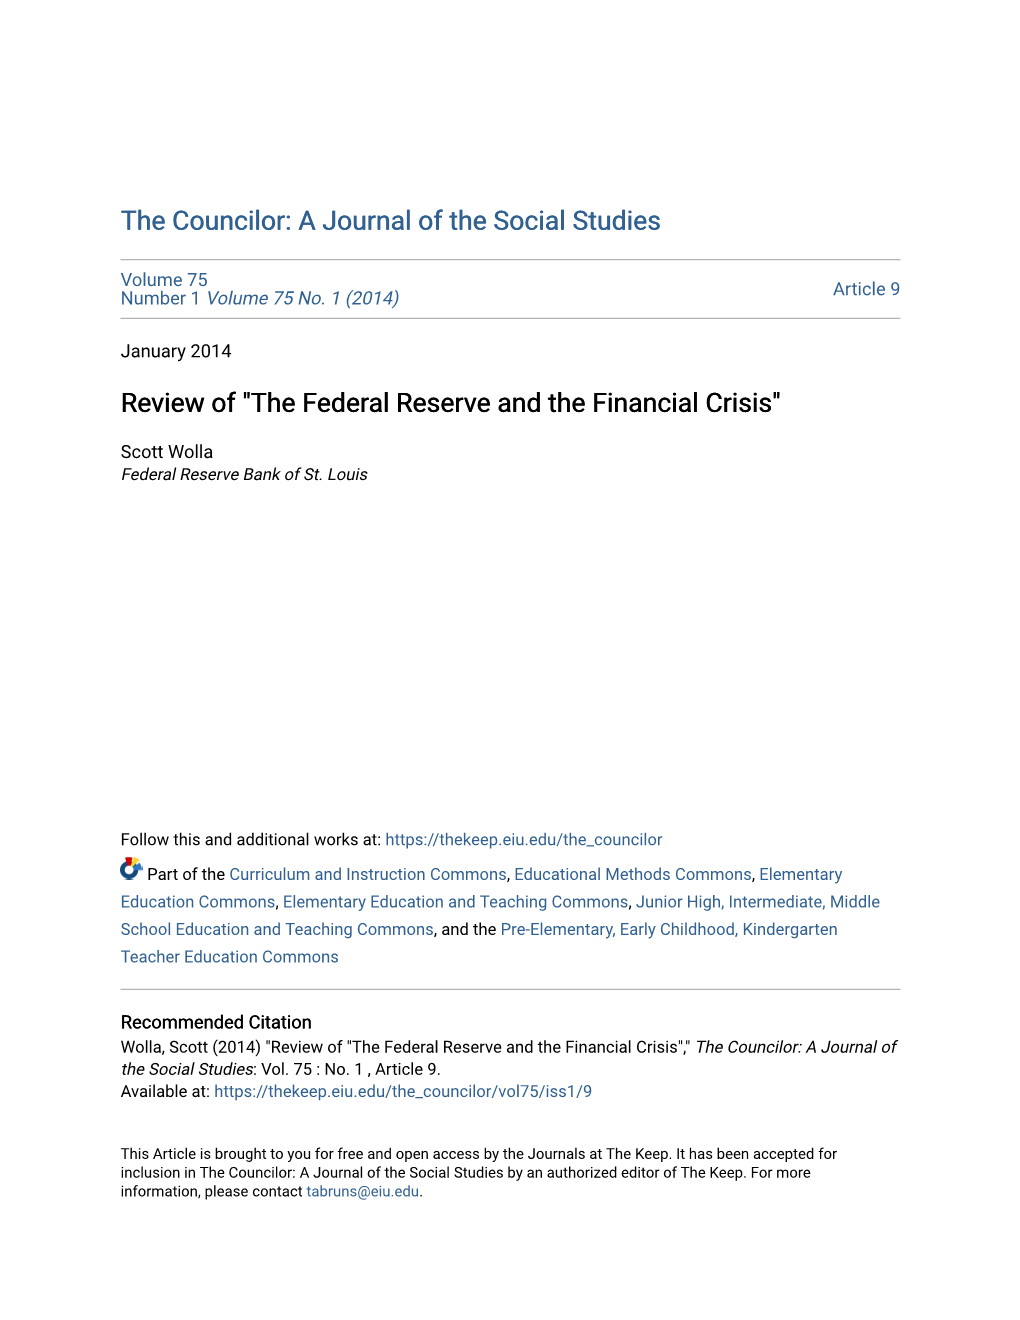 Review of "The Federal Reserve and the Financial Crisis"